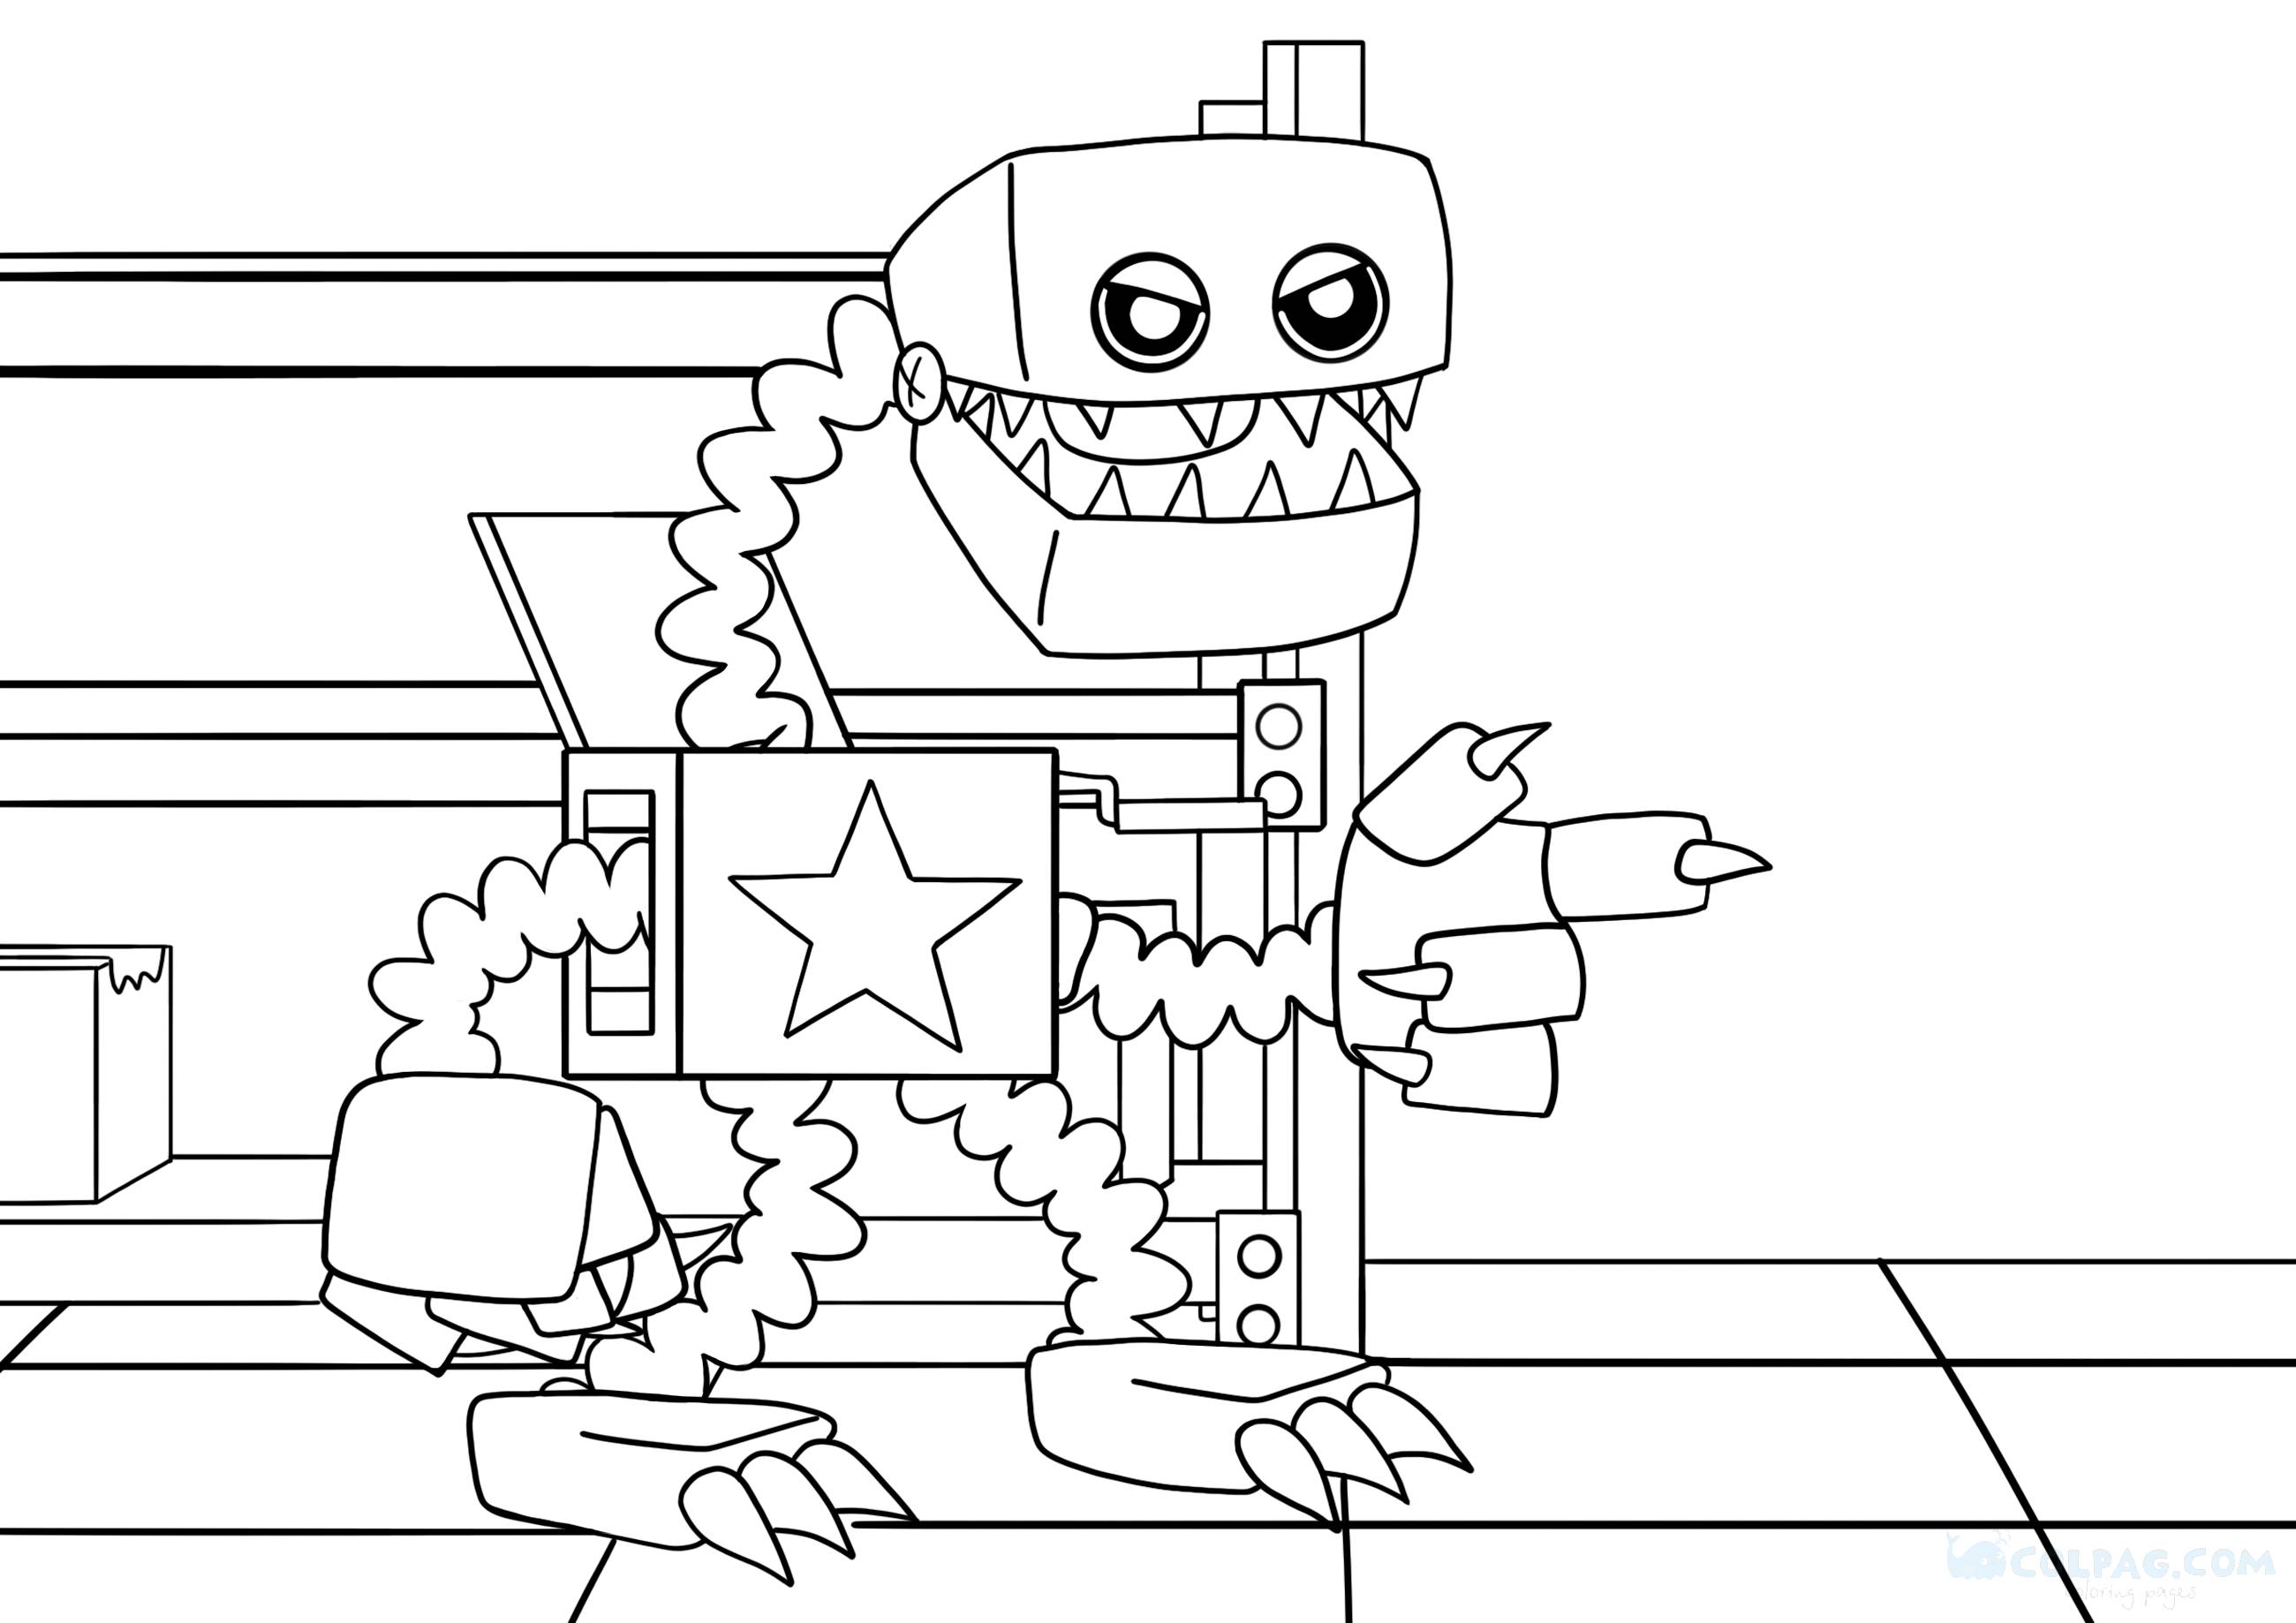 boxy-boo-project-playtime-coloring-page-colpag-com-2